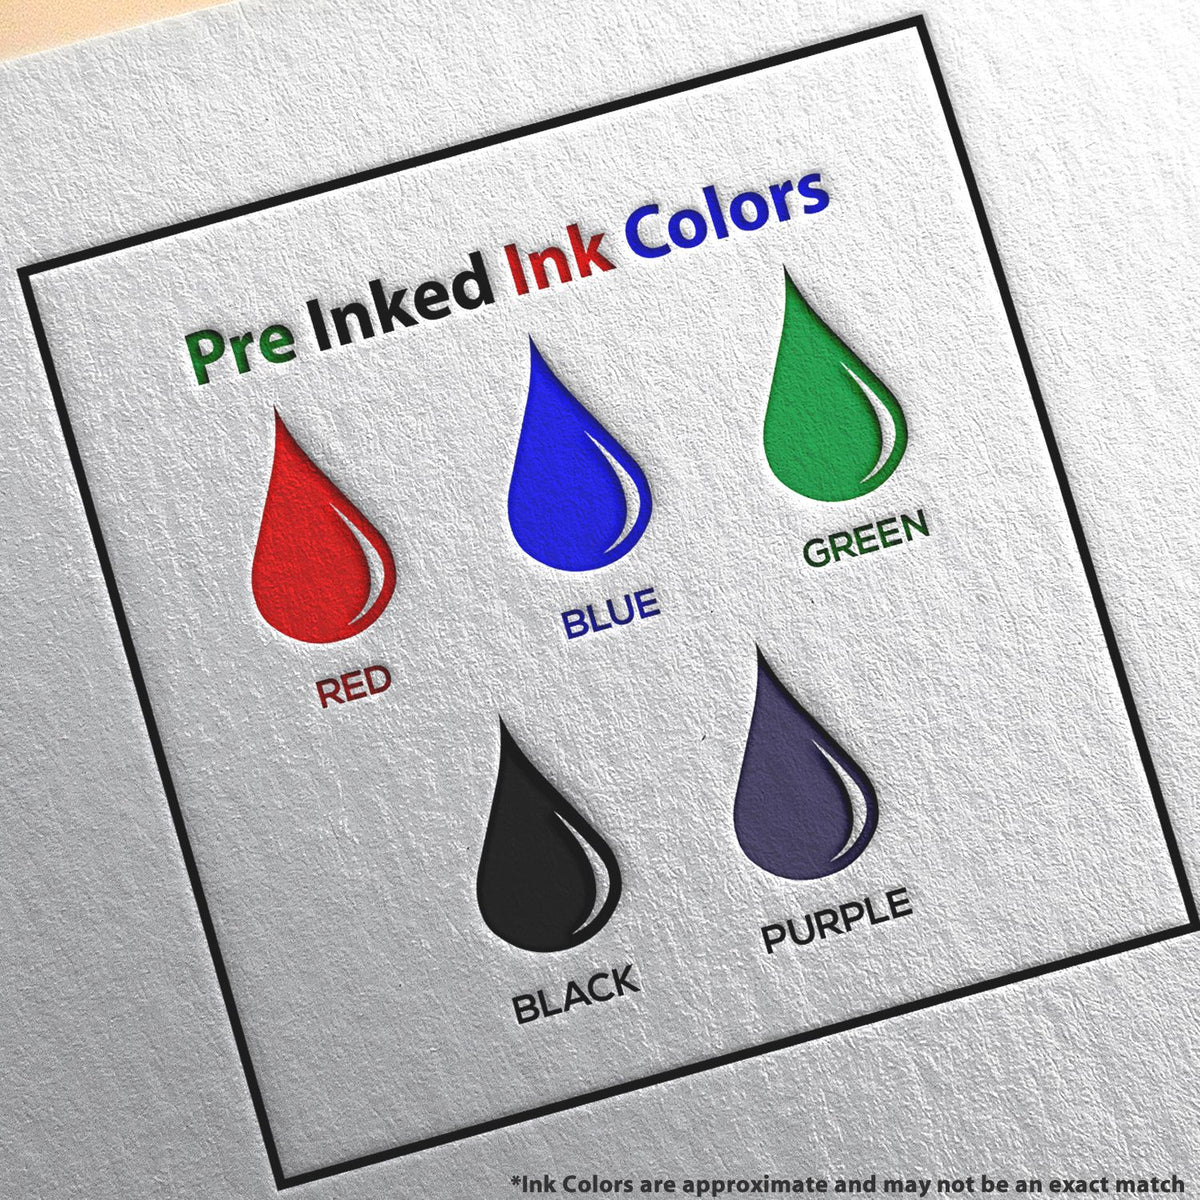 A picture showing the different ink colors or hues available for the Premium MaxLight Pre-Inked Montana Engineering Stamp product.